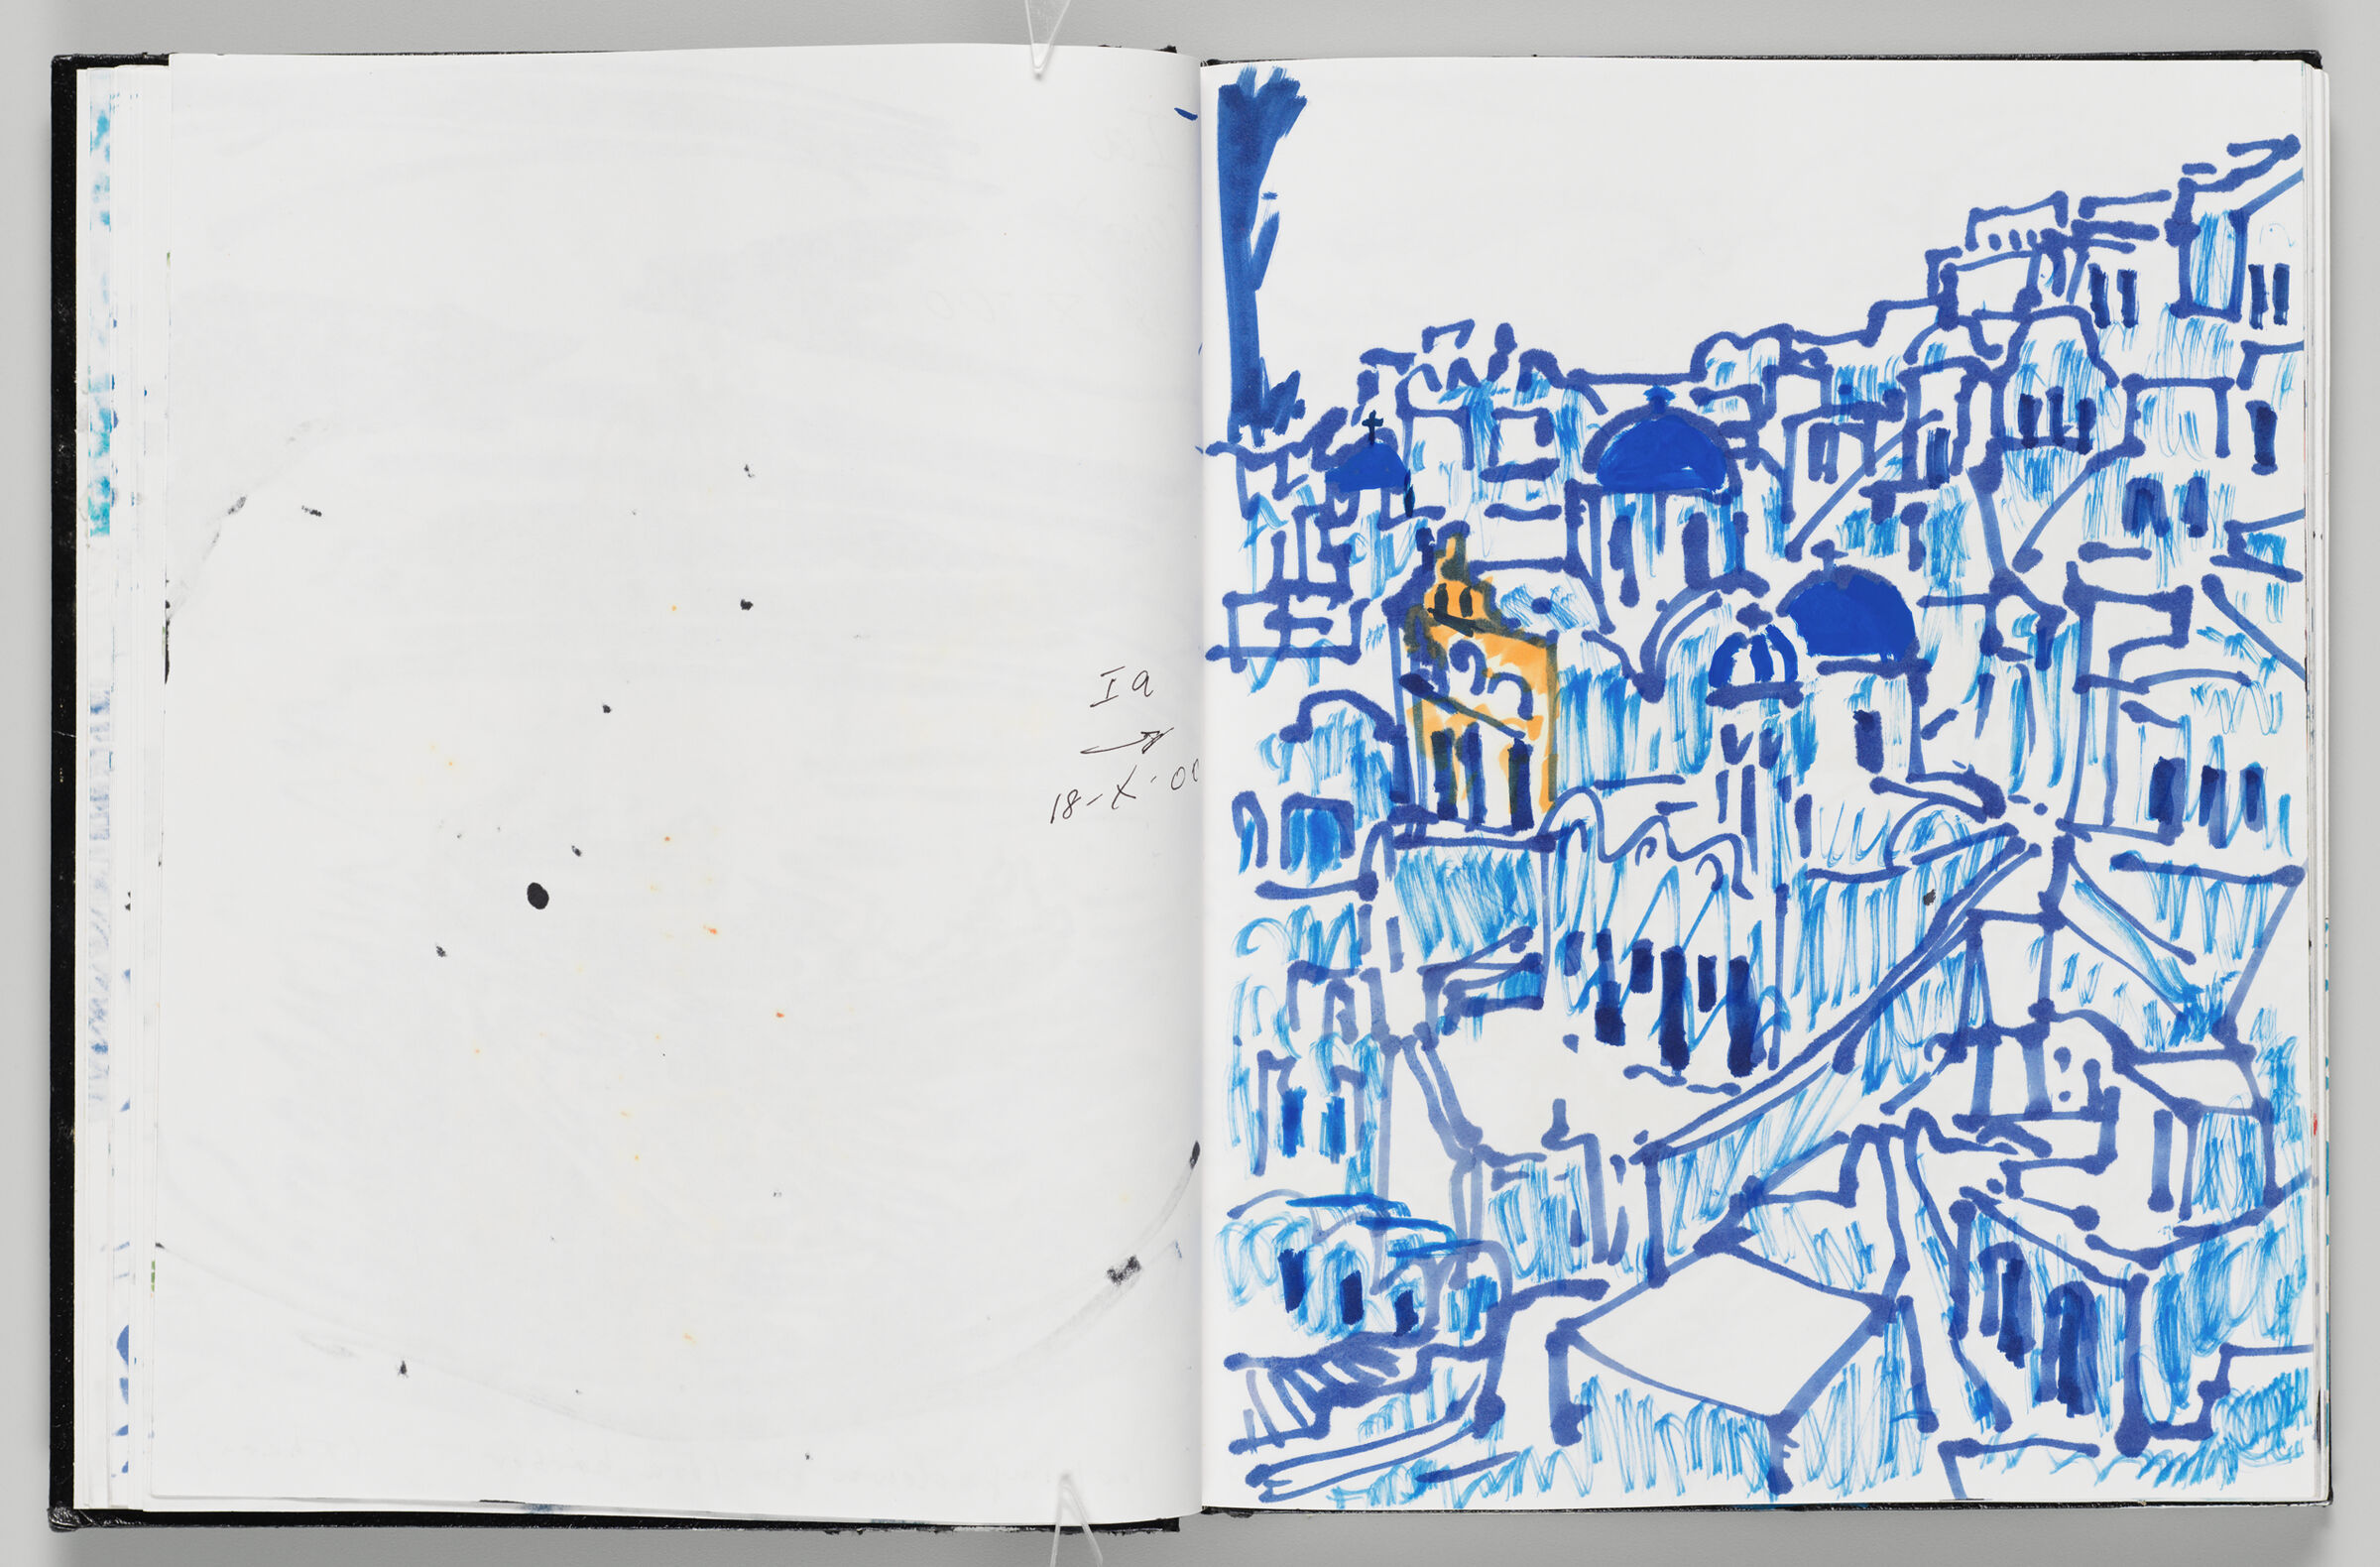 Untitled (Bleed-Through Of Previous Page With Note, Left Page); Untitled (Santorini Cityscape, Right Page)